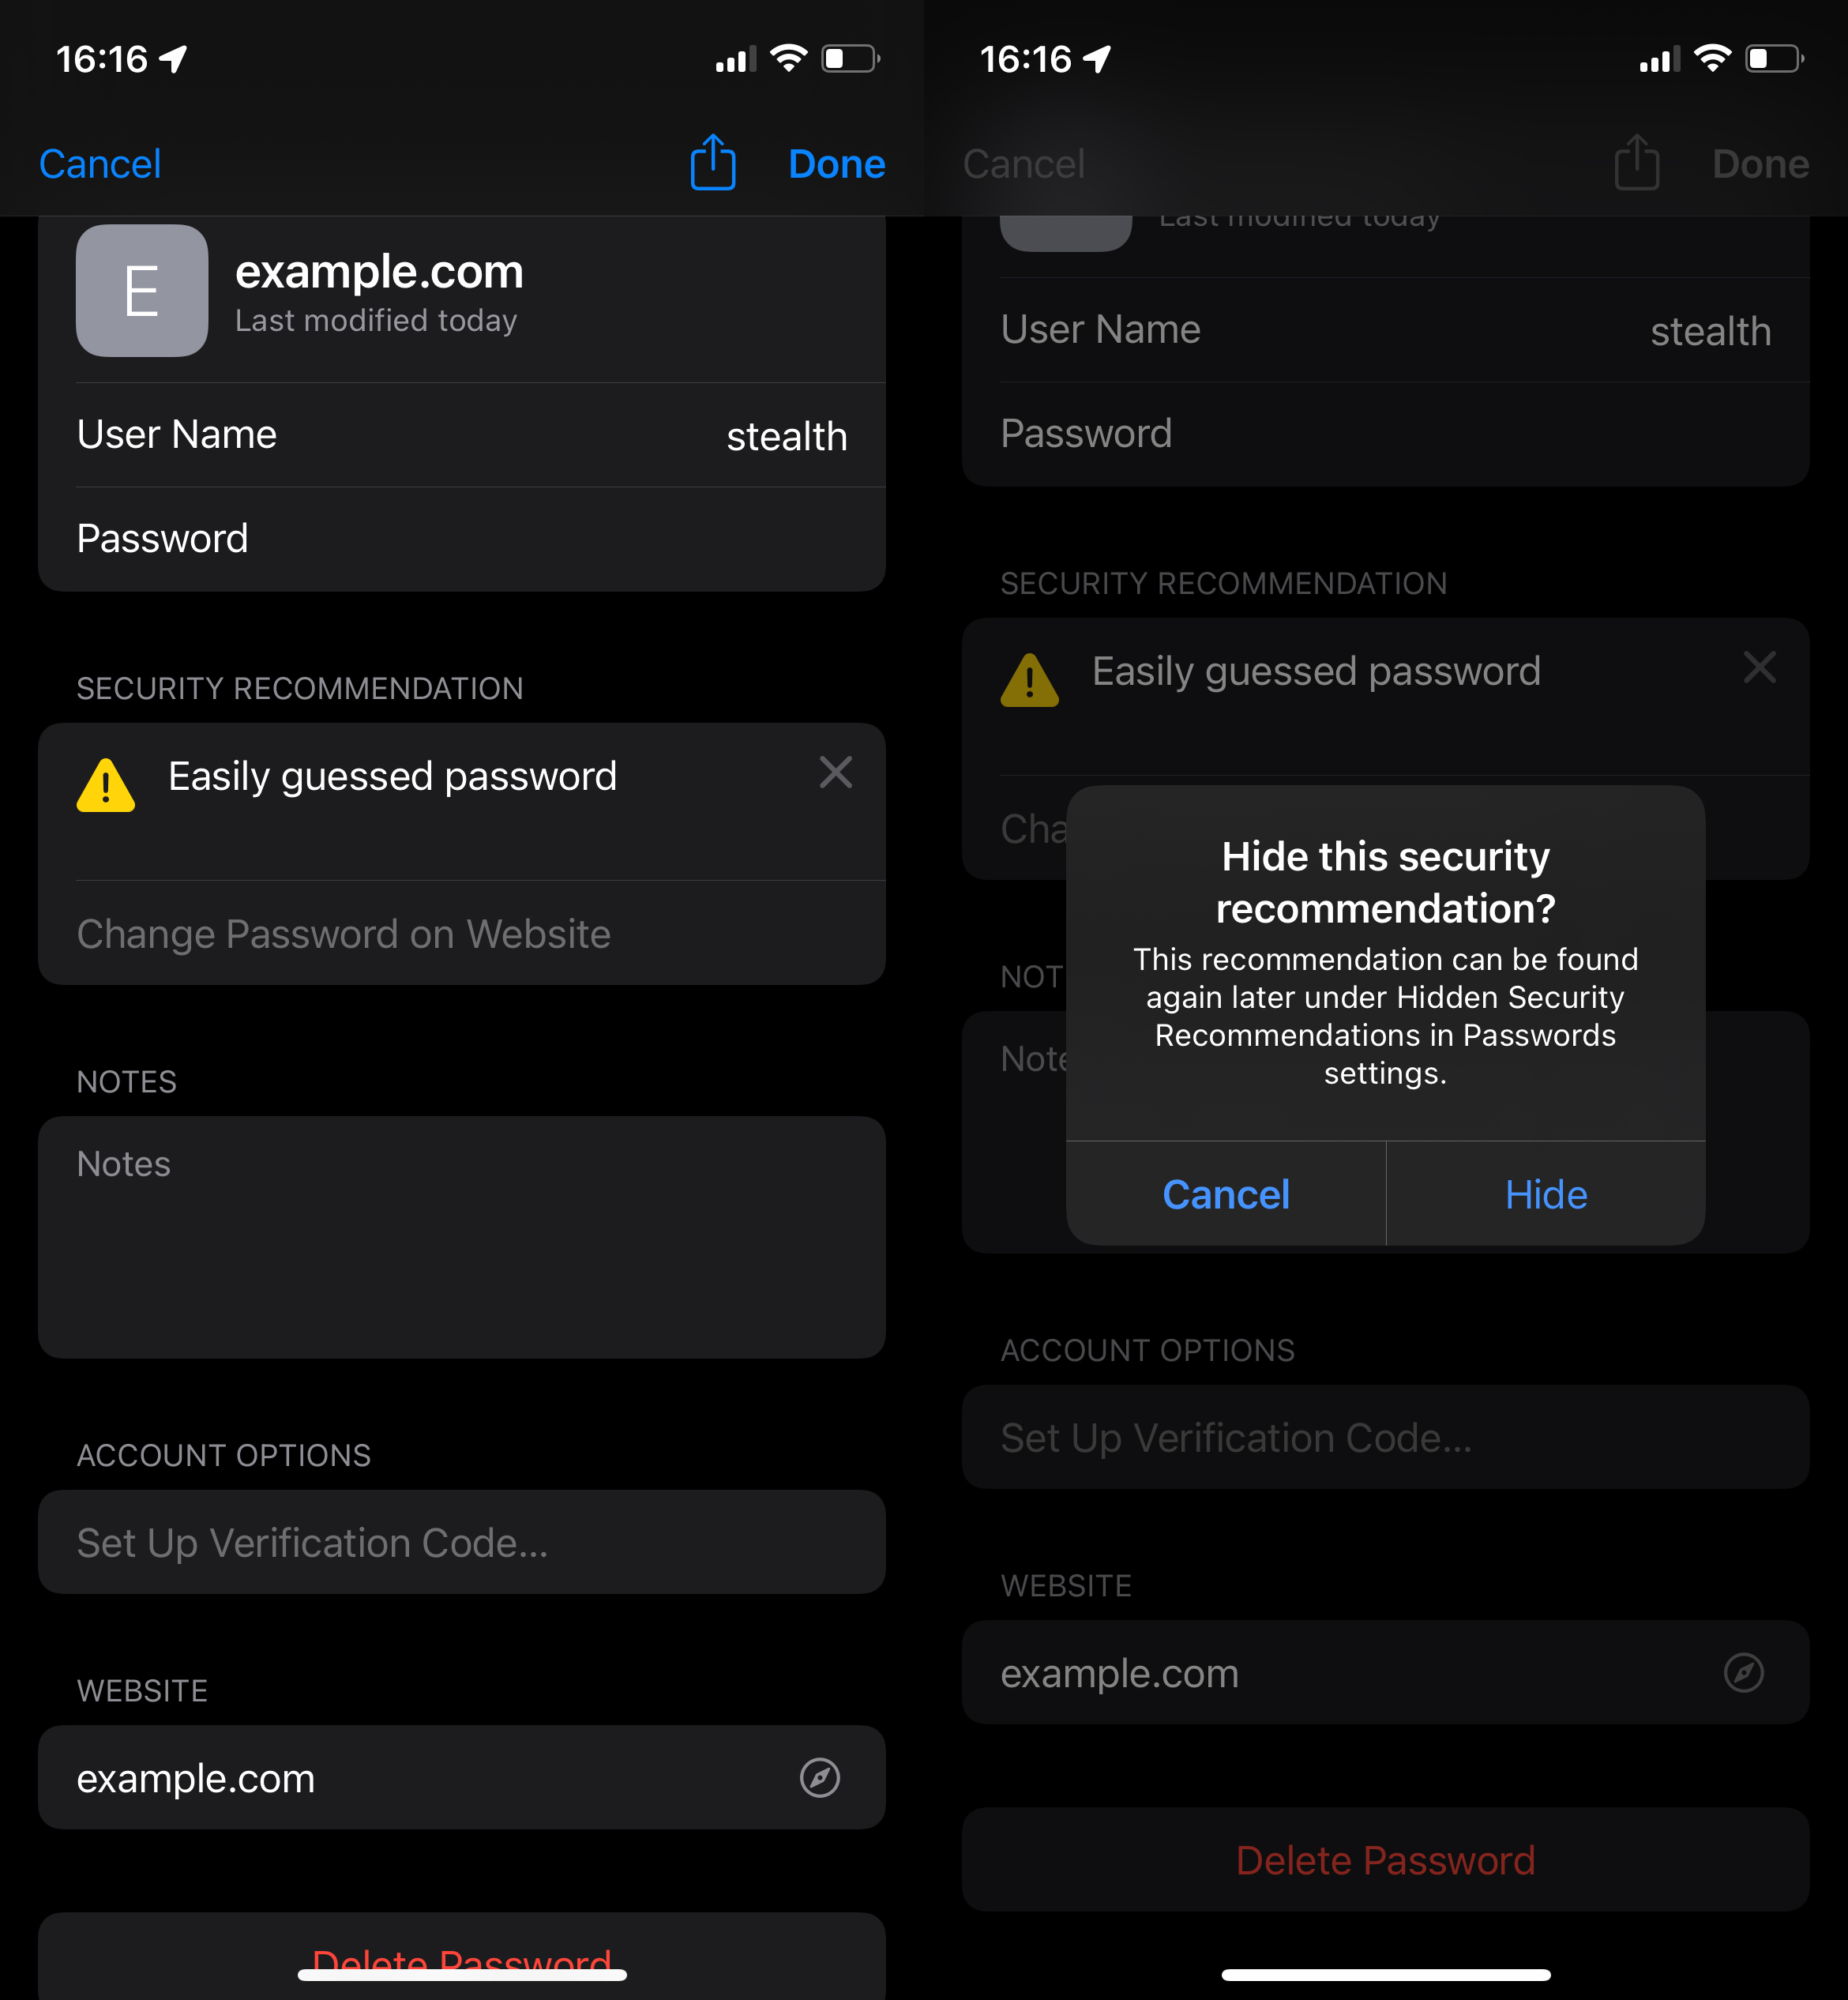 iCloud Keychain Notes and Hide Security συστάσεις